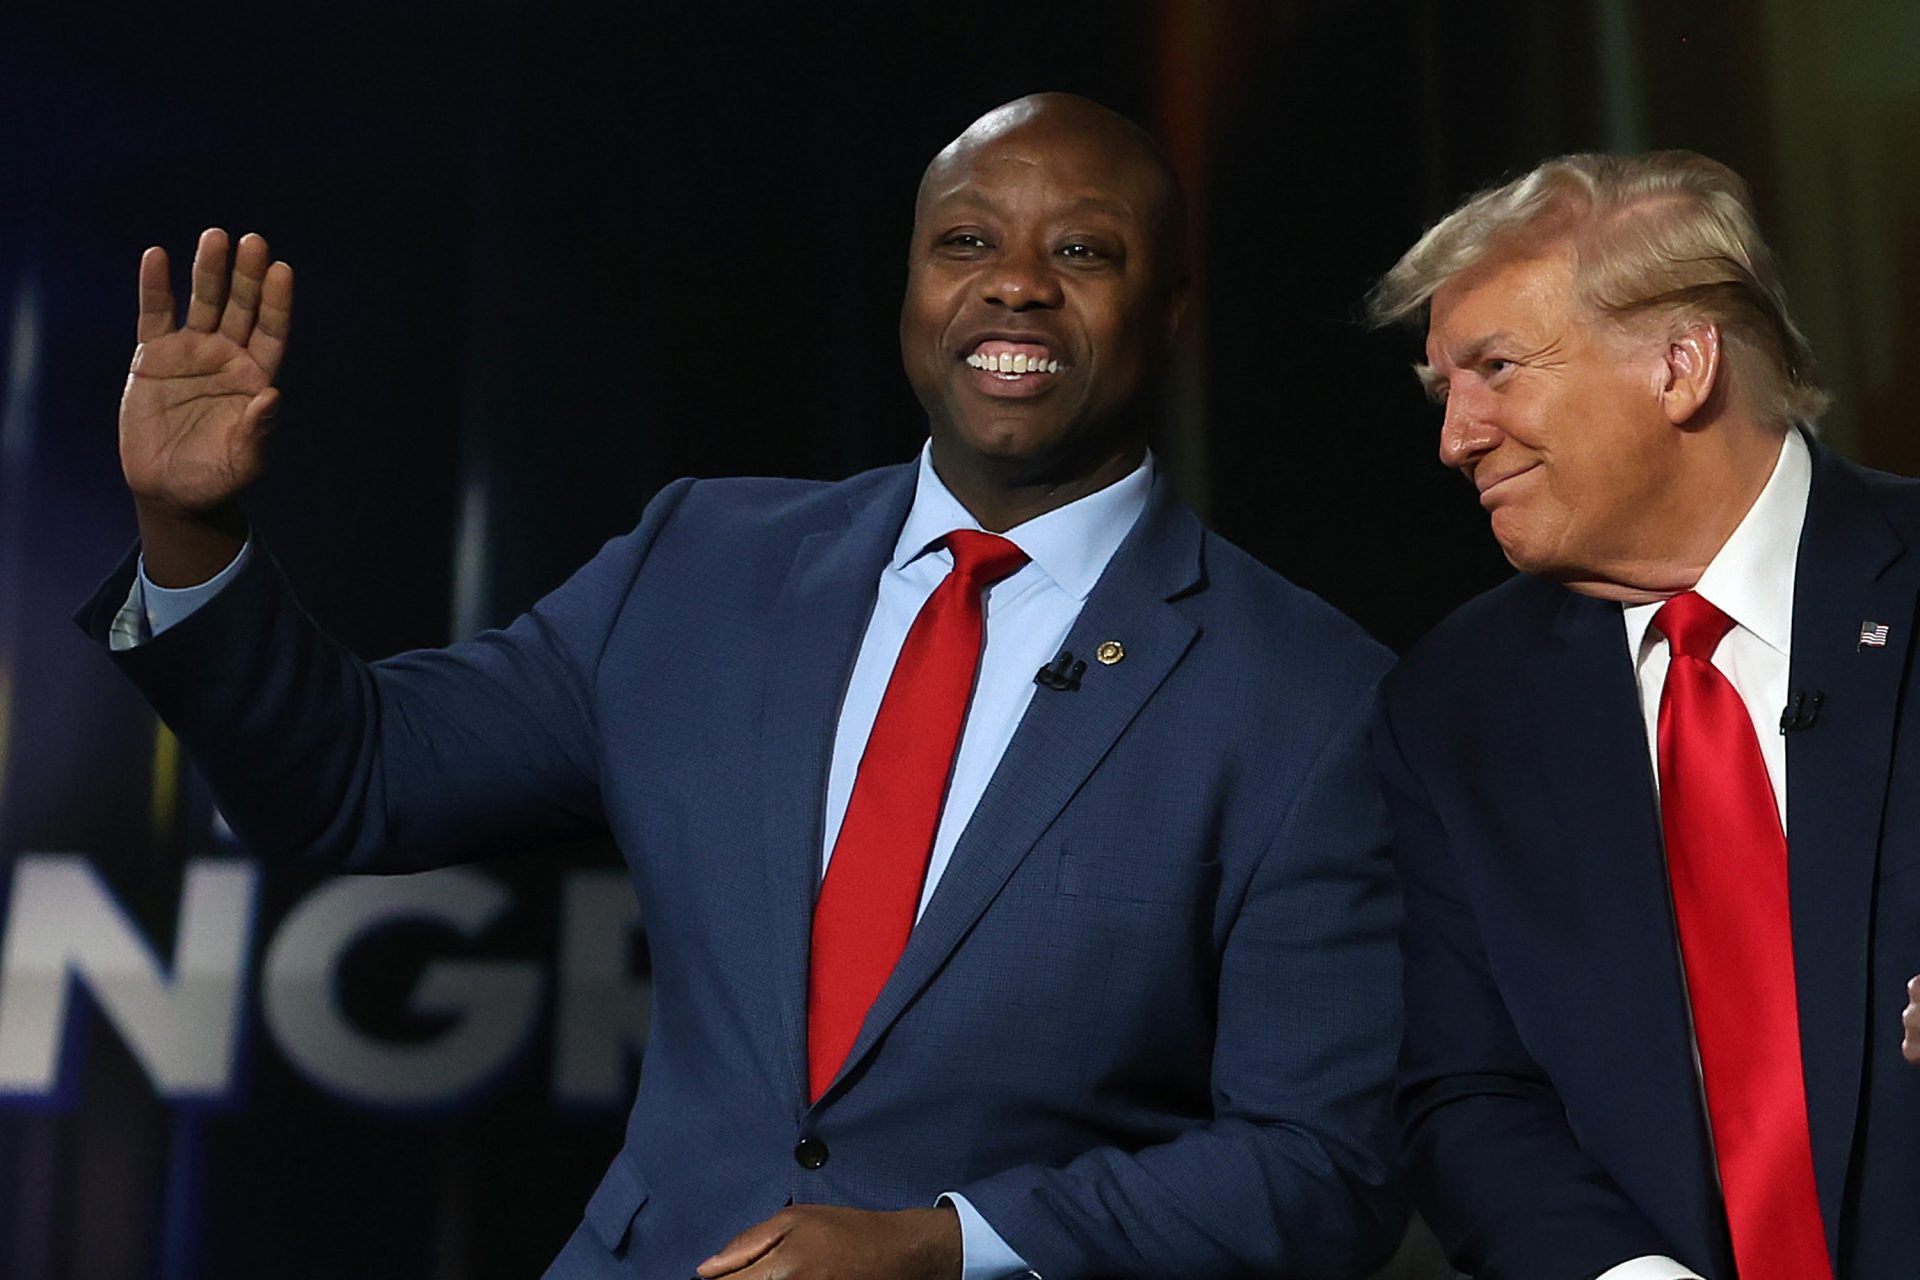 Tim Scott might be the man for the job